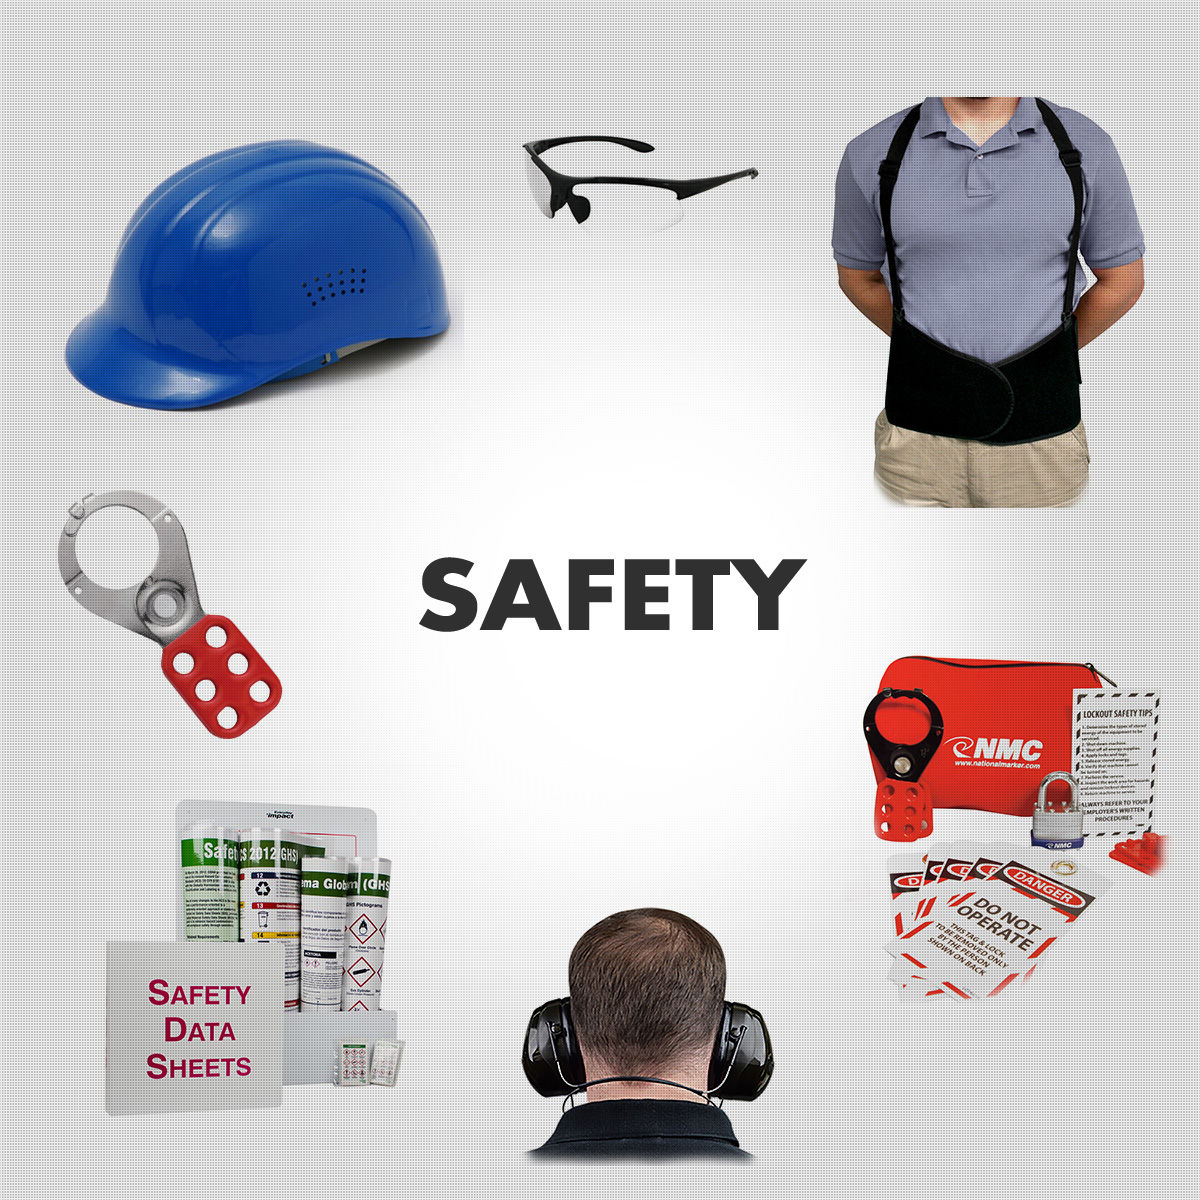 Safety Equipment - Signs, Vests, Eye, Ear, Back & Head Protection, Etc.